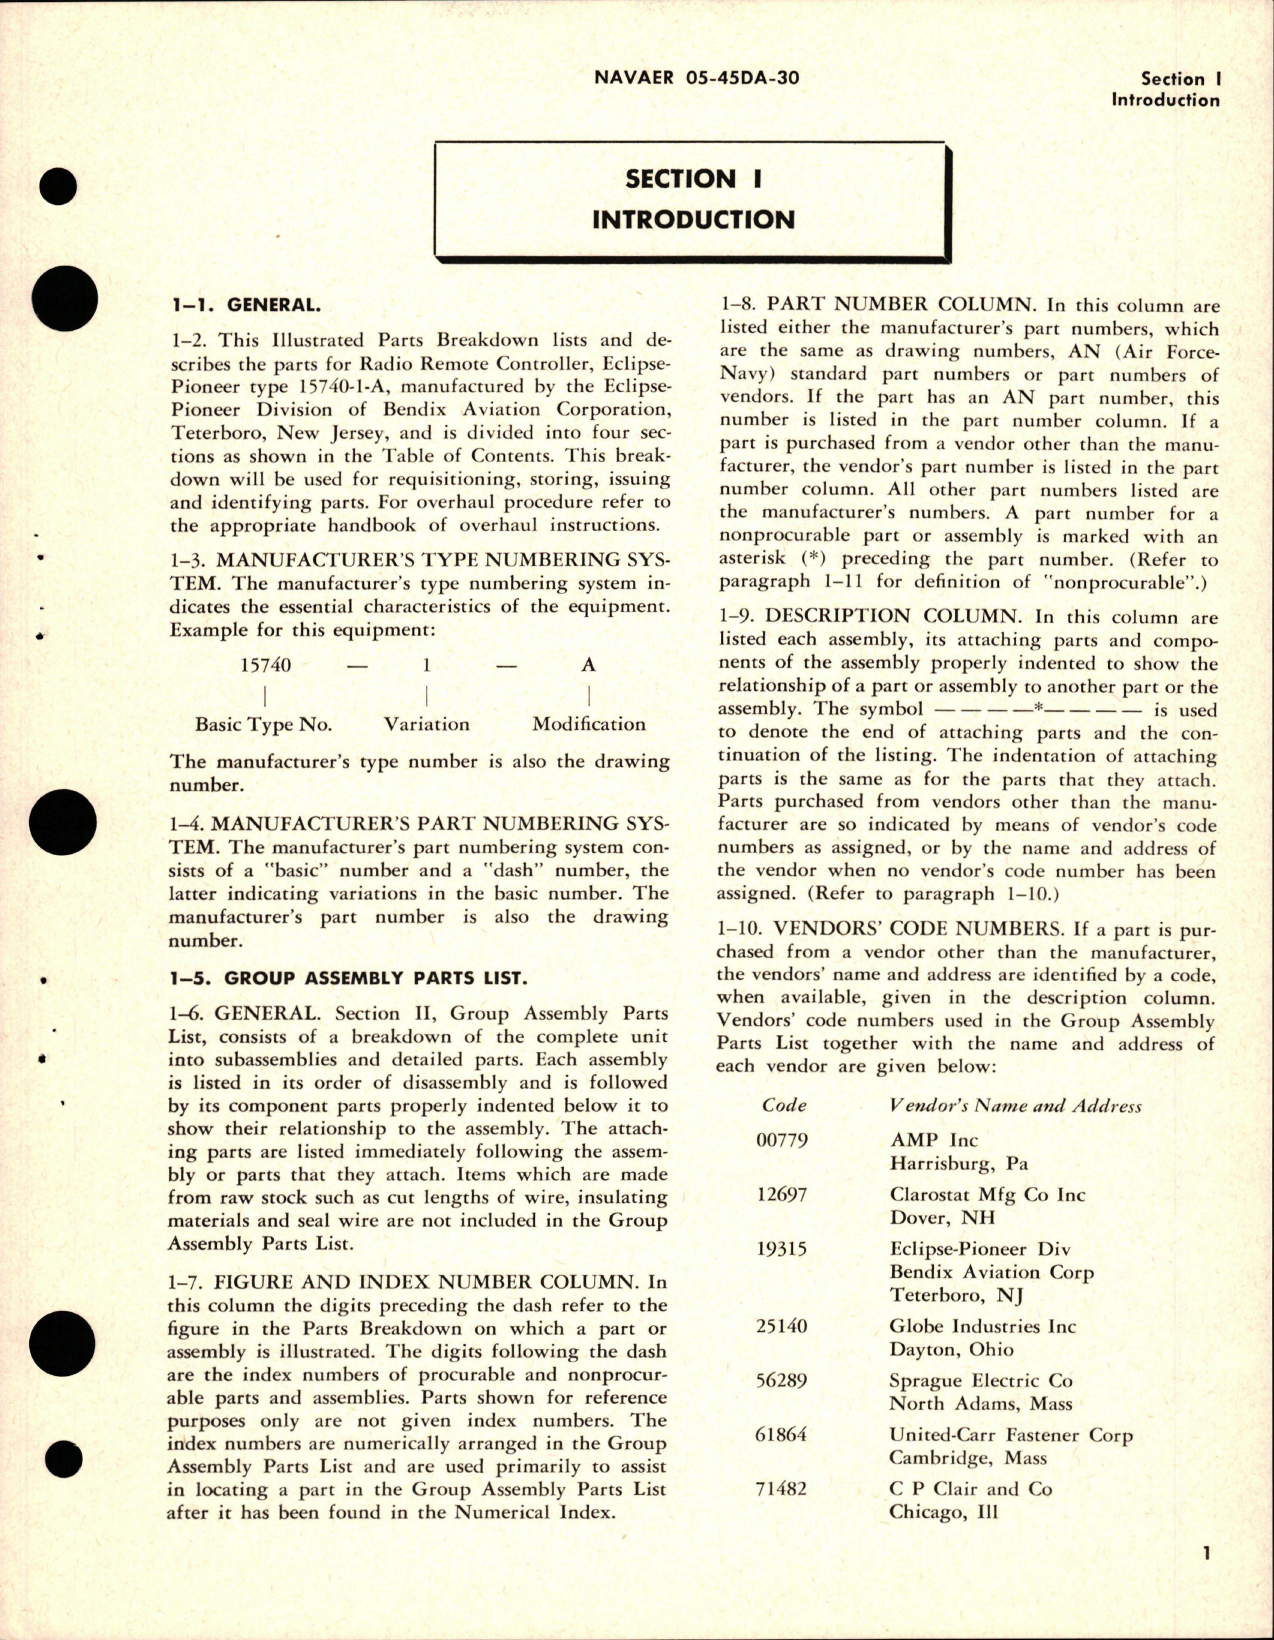 Sample page 5 from AirCorps Library document: Illustrated Parts Breakdown for Radio Remote Controller - Part 15740-1-A